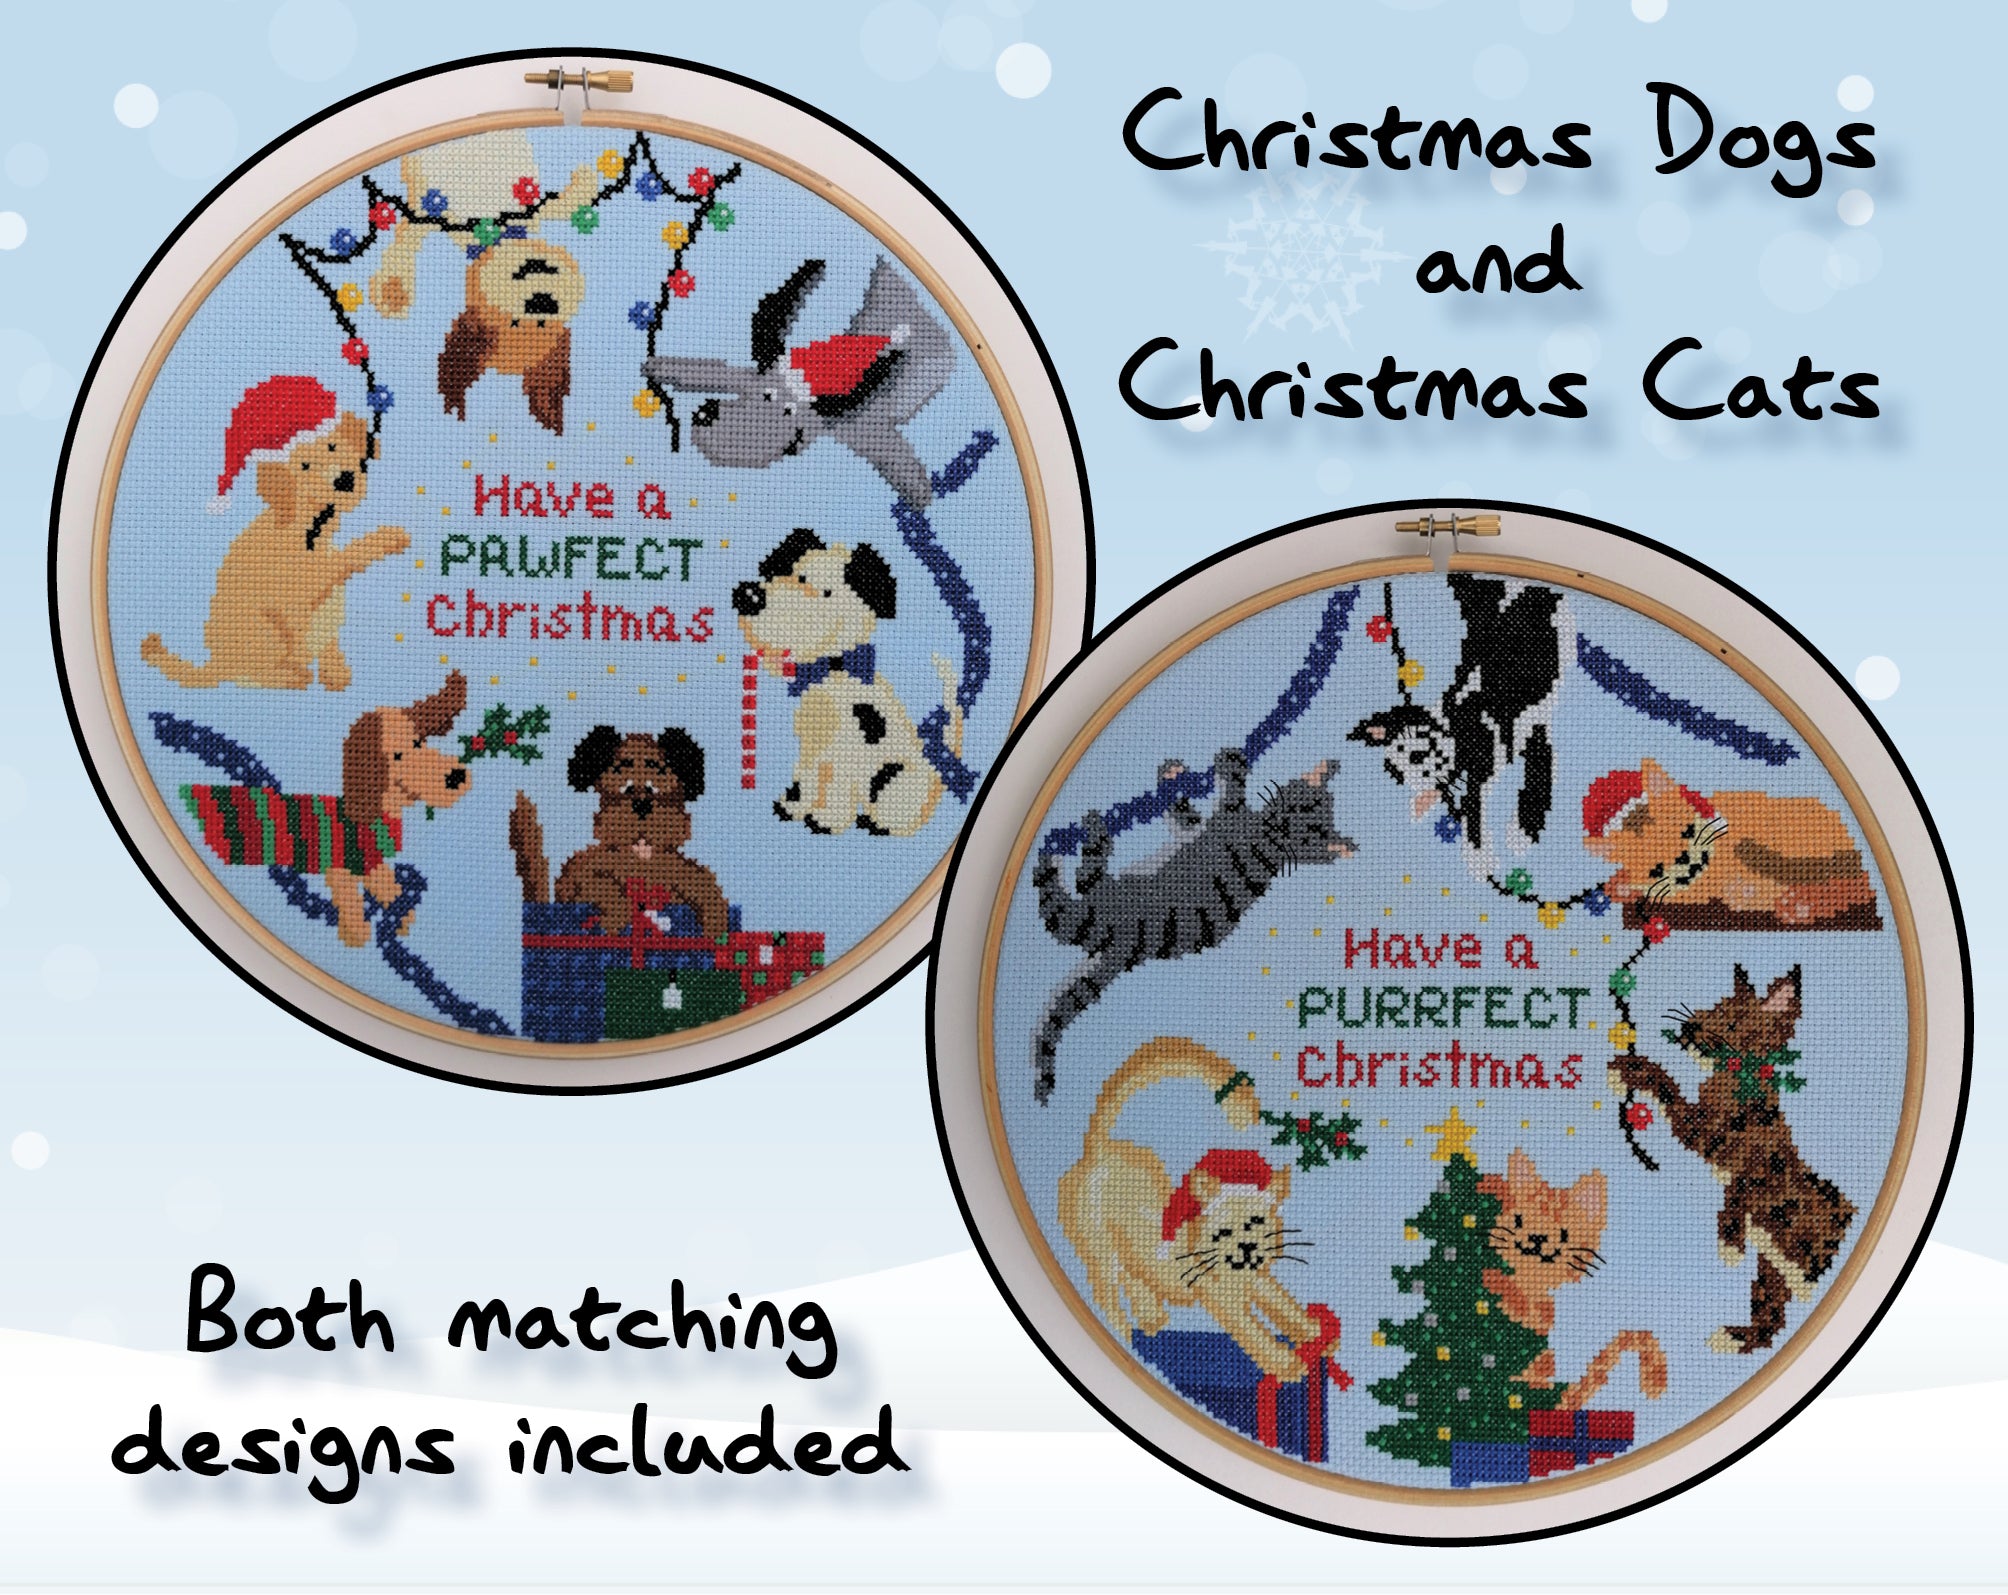 Christmas Dogs and Christmas Cats cross stitch patterns. Both matching designs included.